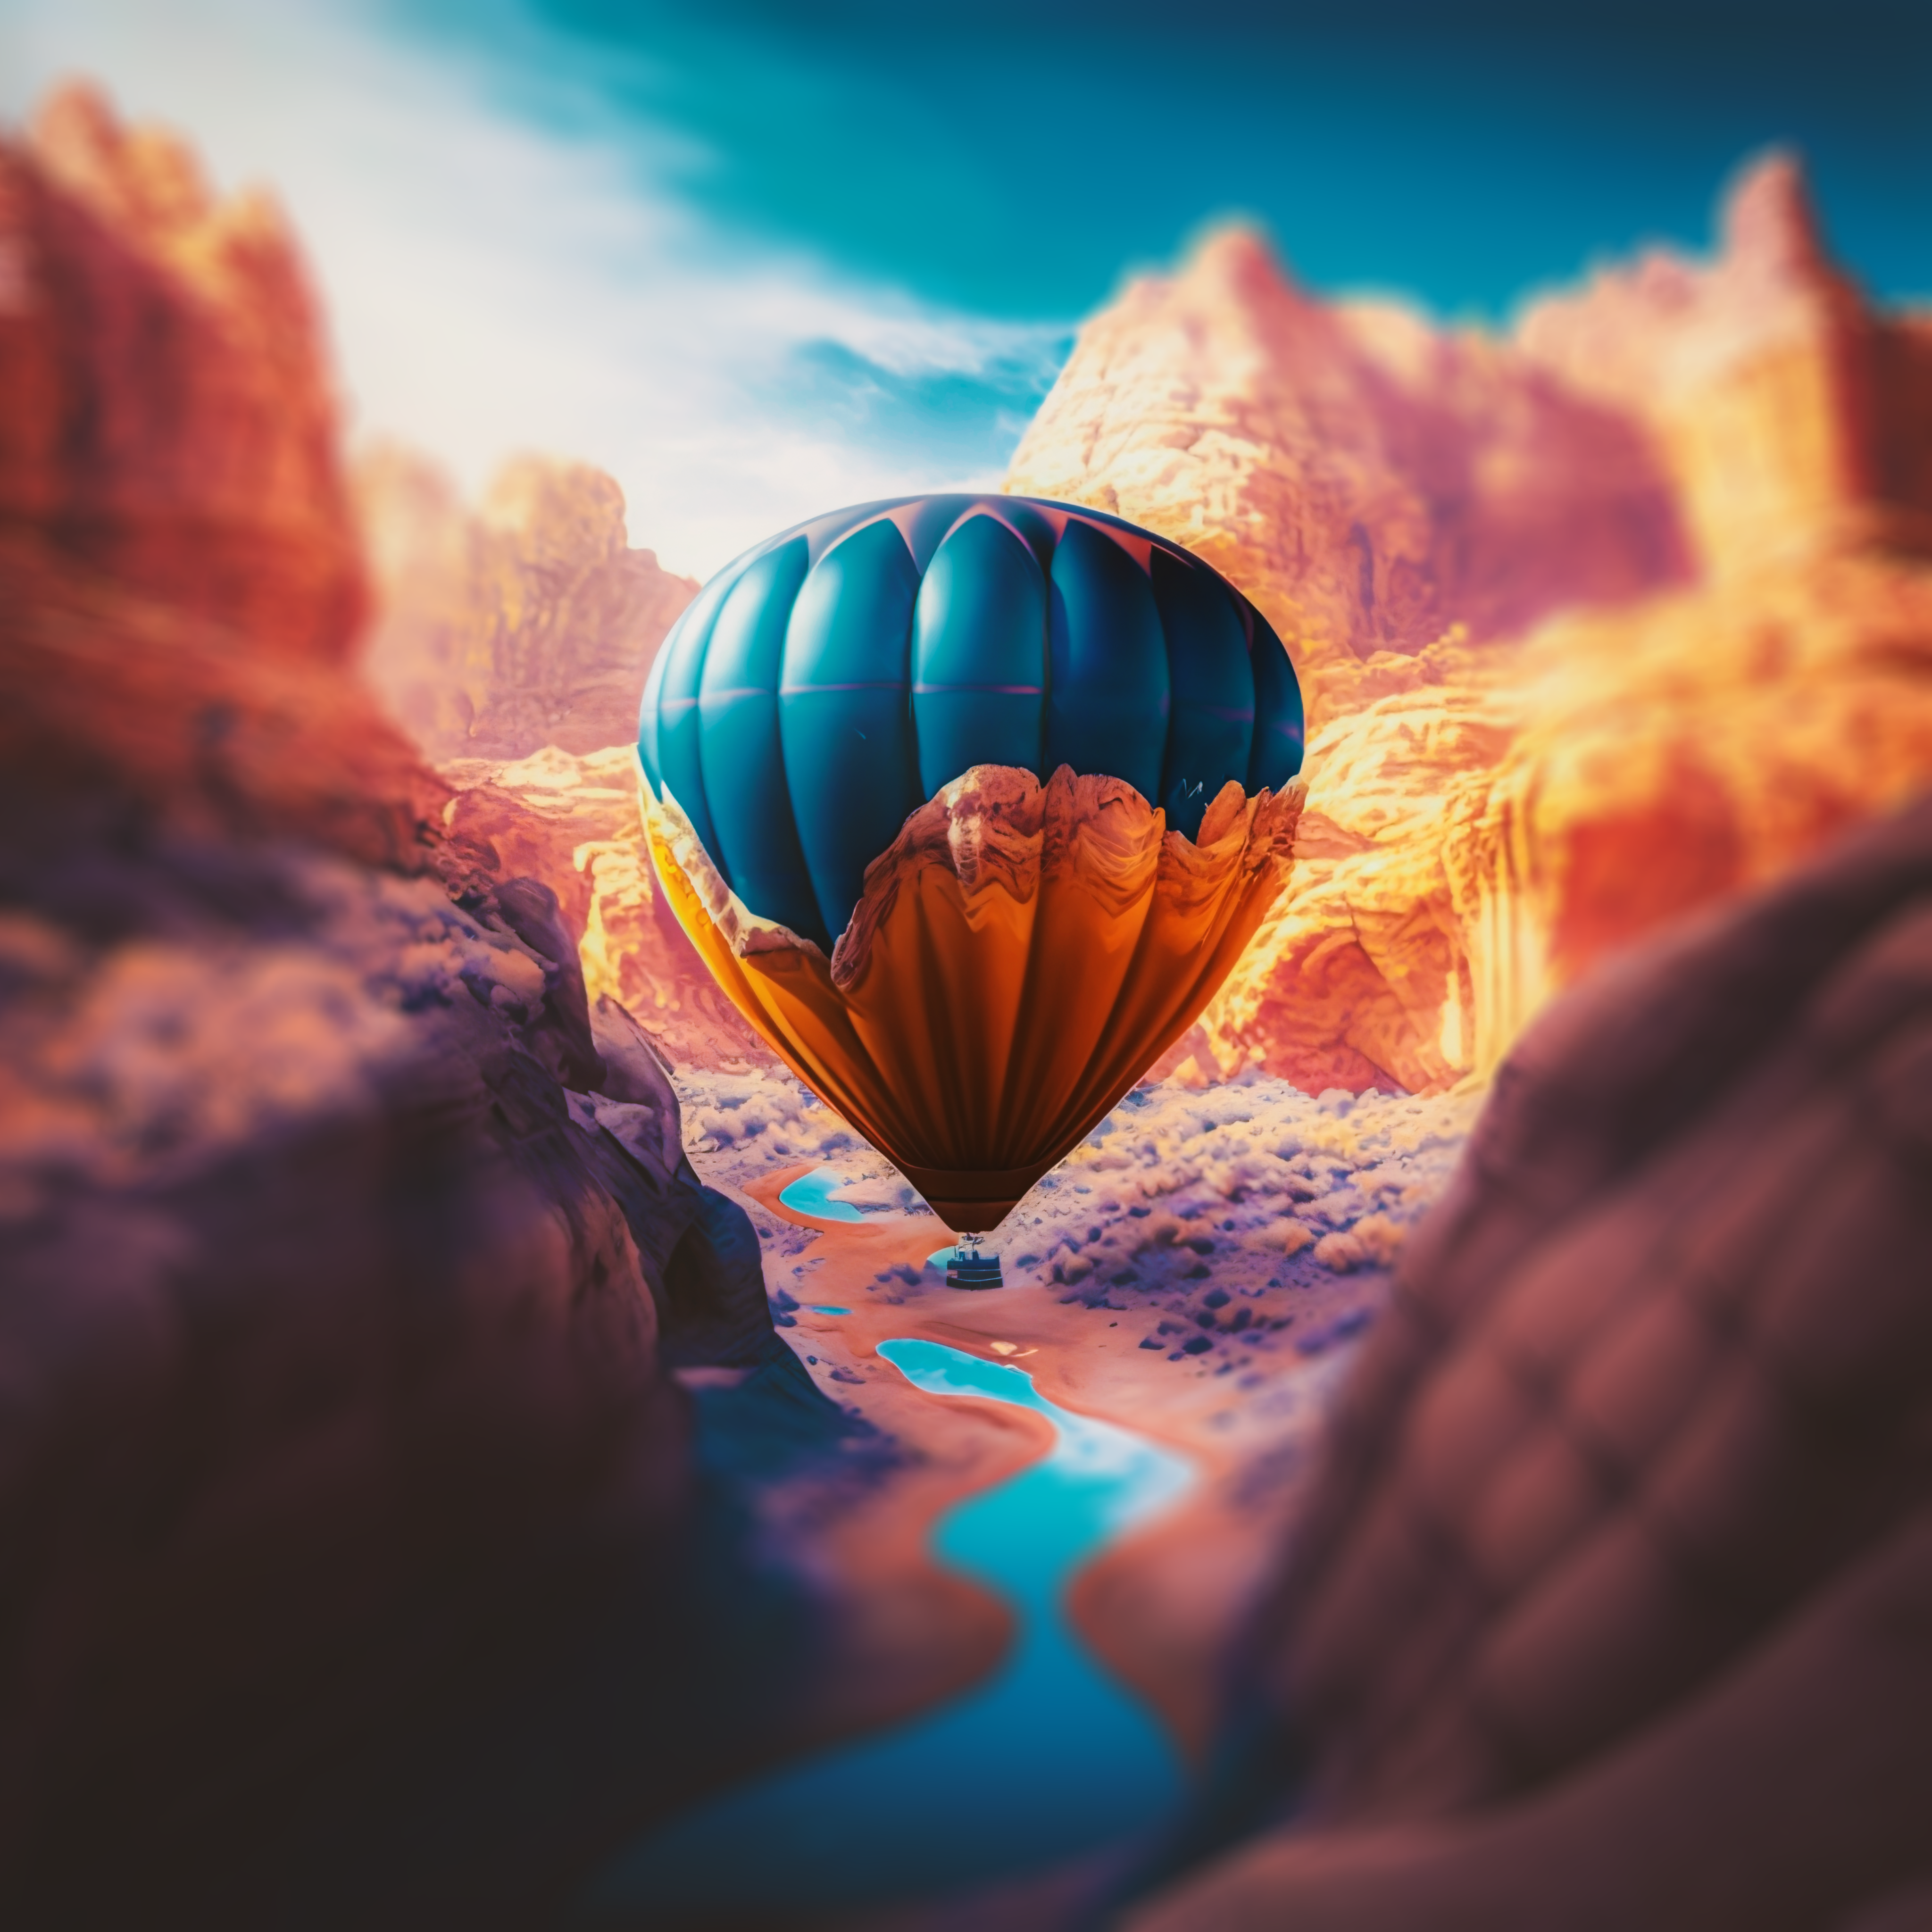 verjaardag dorst planter Hot air balloon in the canyon by WorkswithAI on DeviantArt